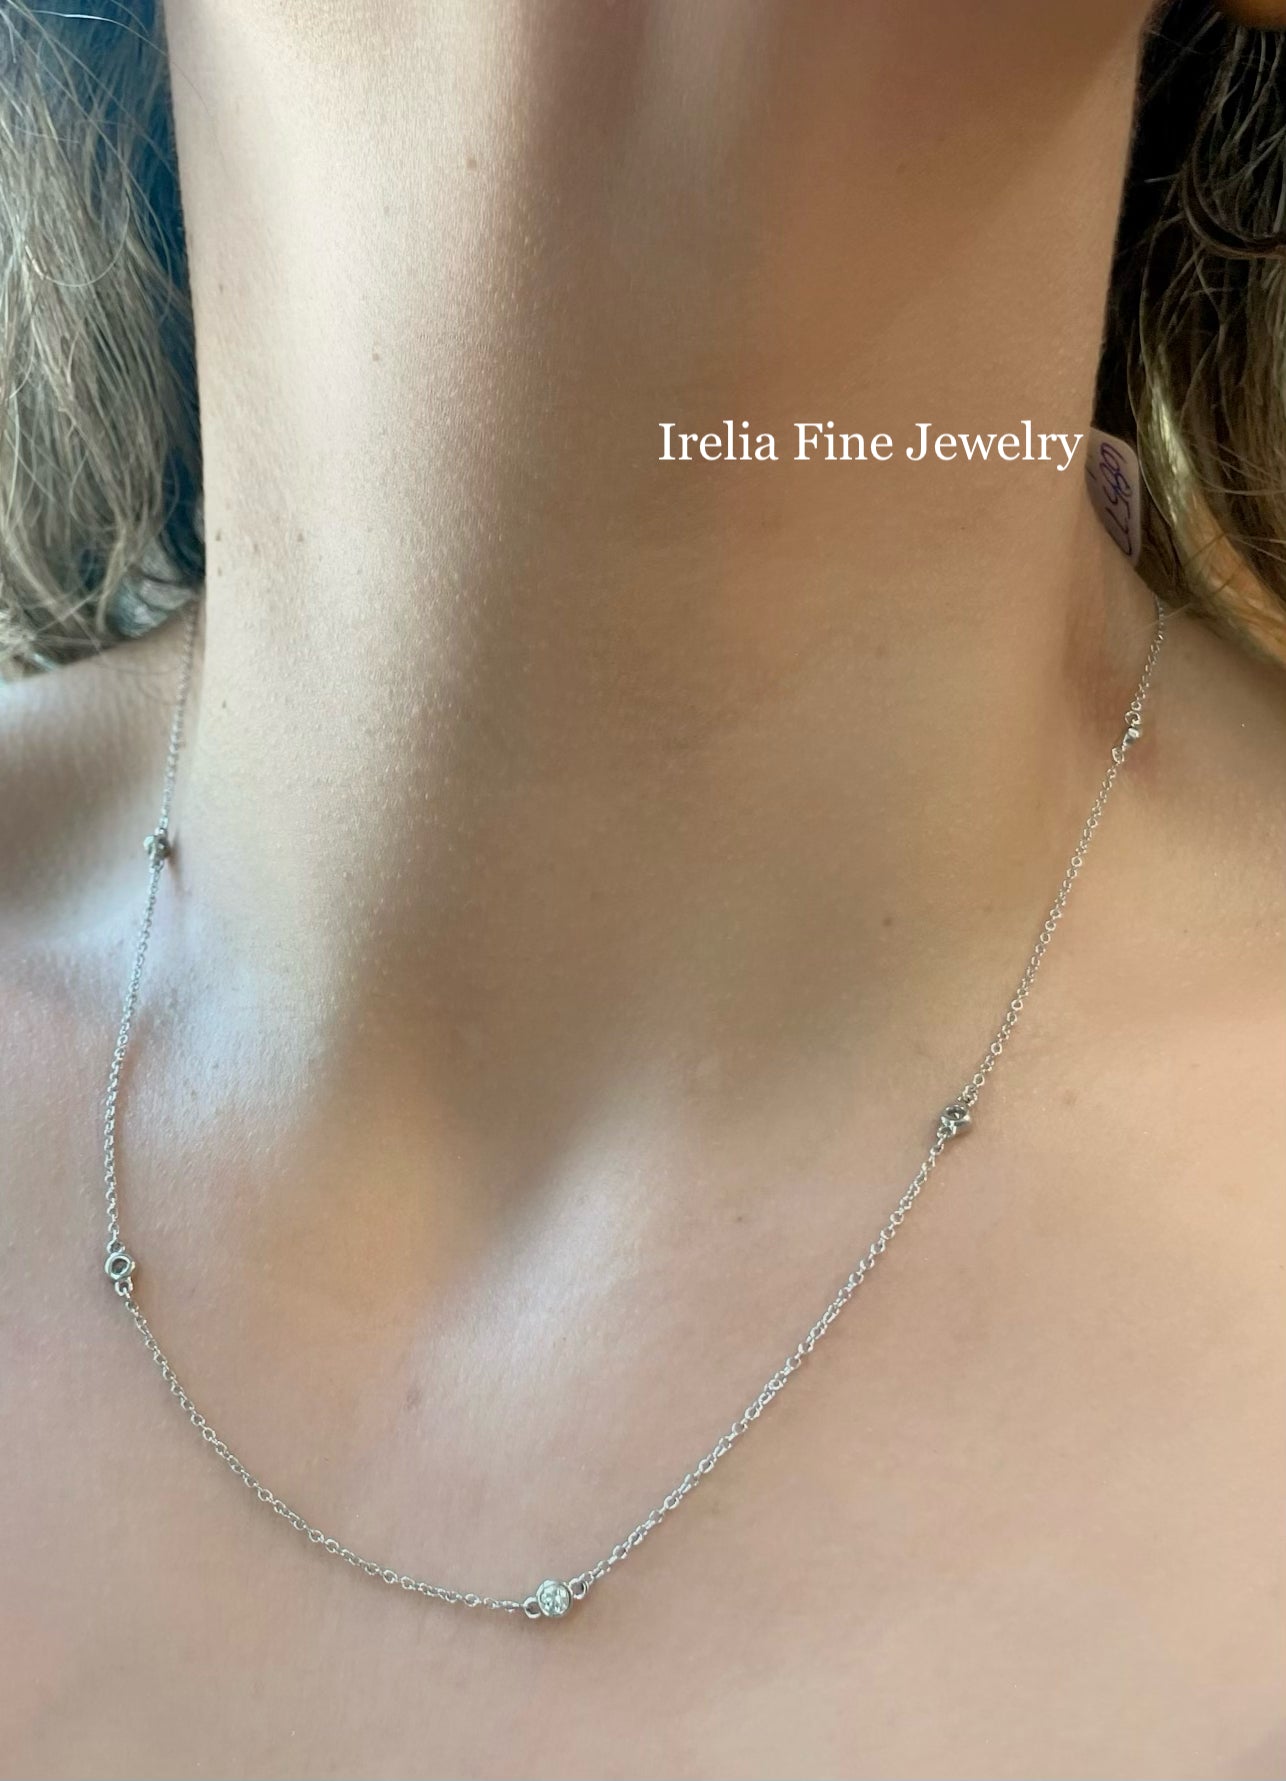 14K White 1/4 CTW Natural Diamond 5-Station, Comes with 14k Gold 18" Necklace